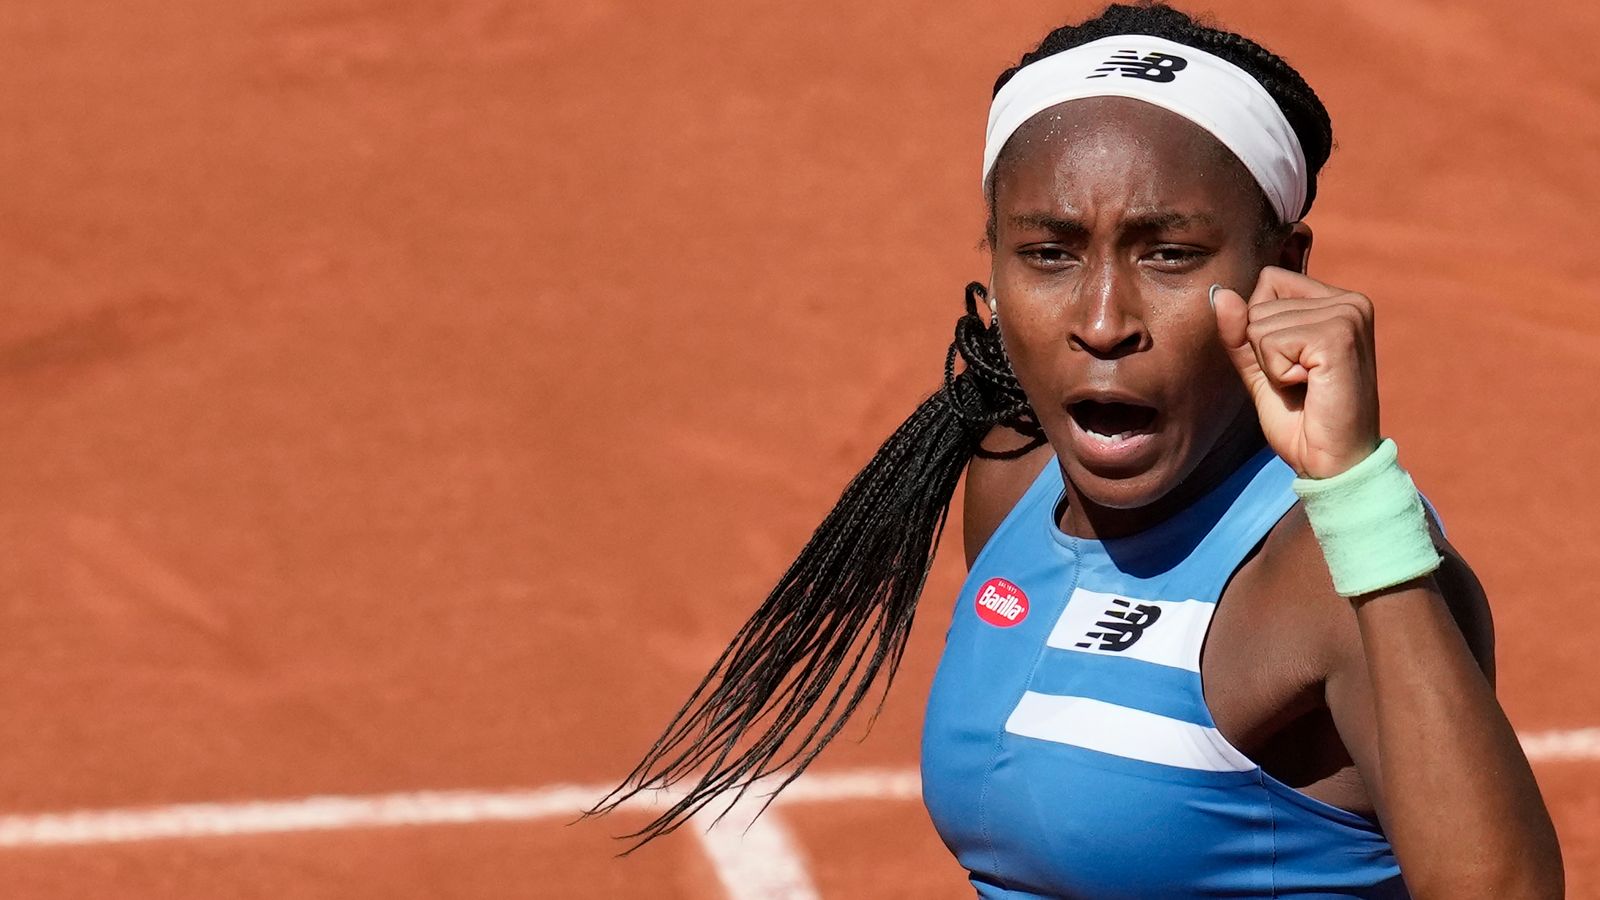 French Open: Iga Swiatek dishes out a double bagel while Coco Gauff ...